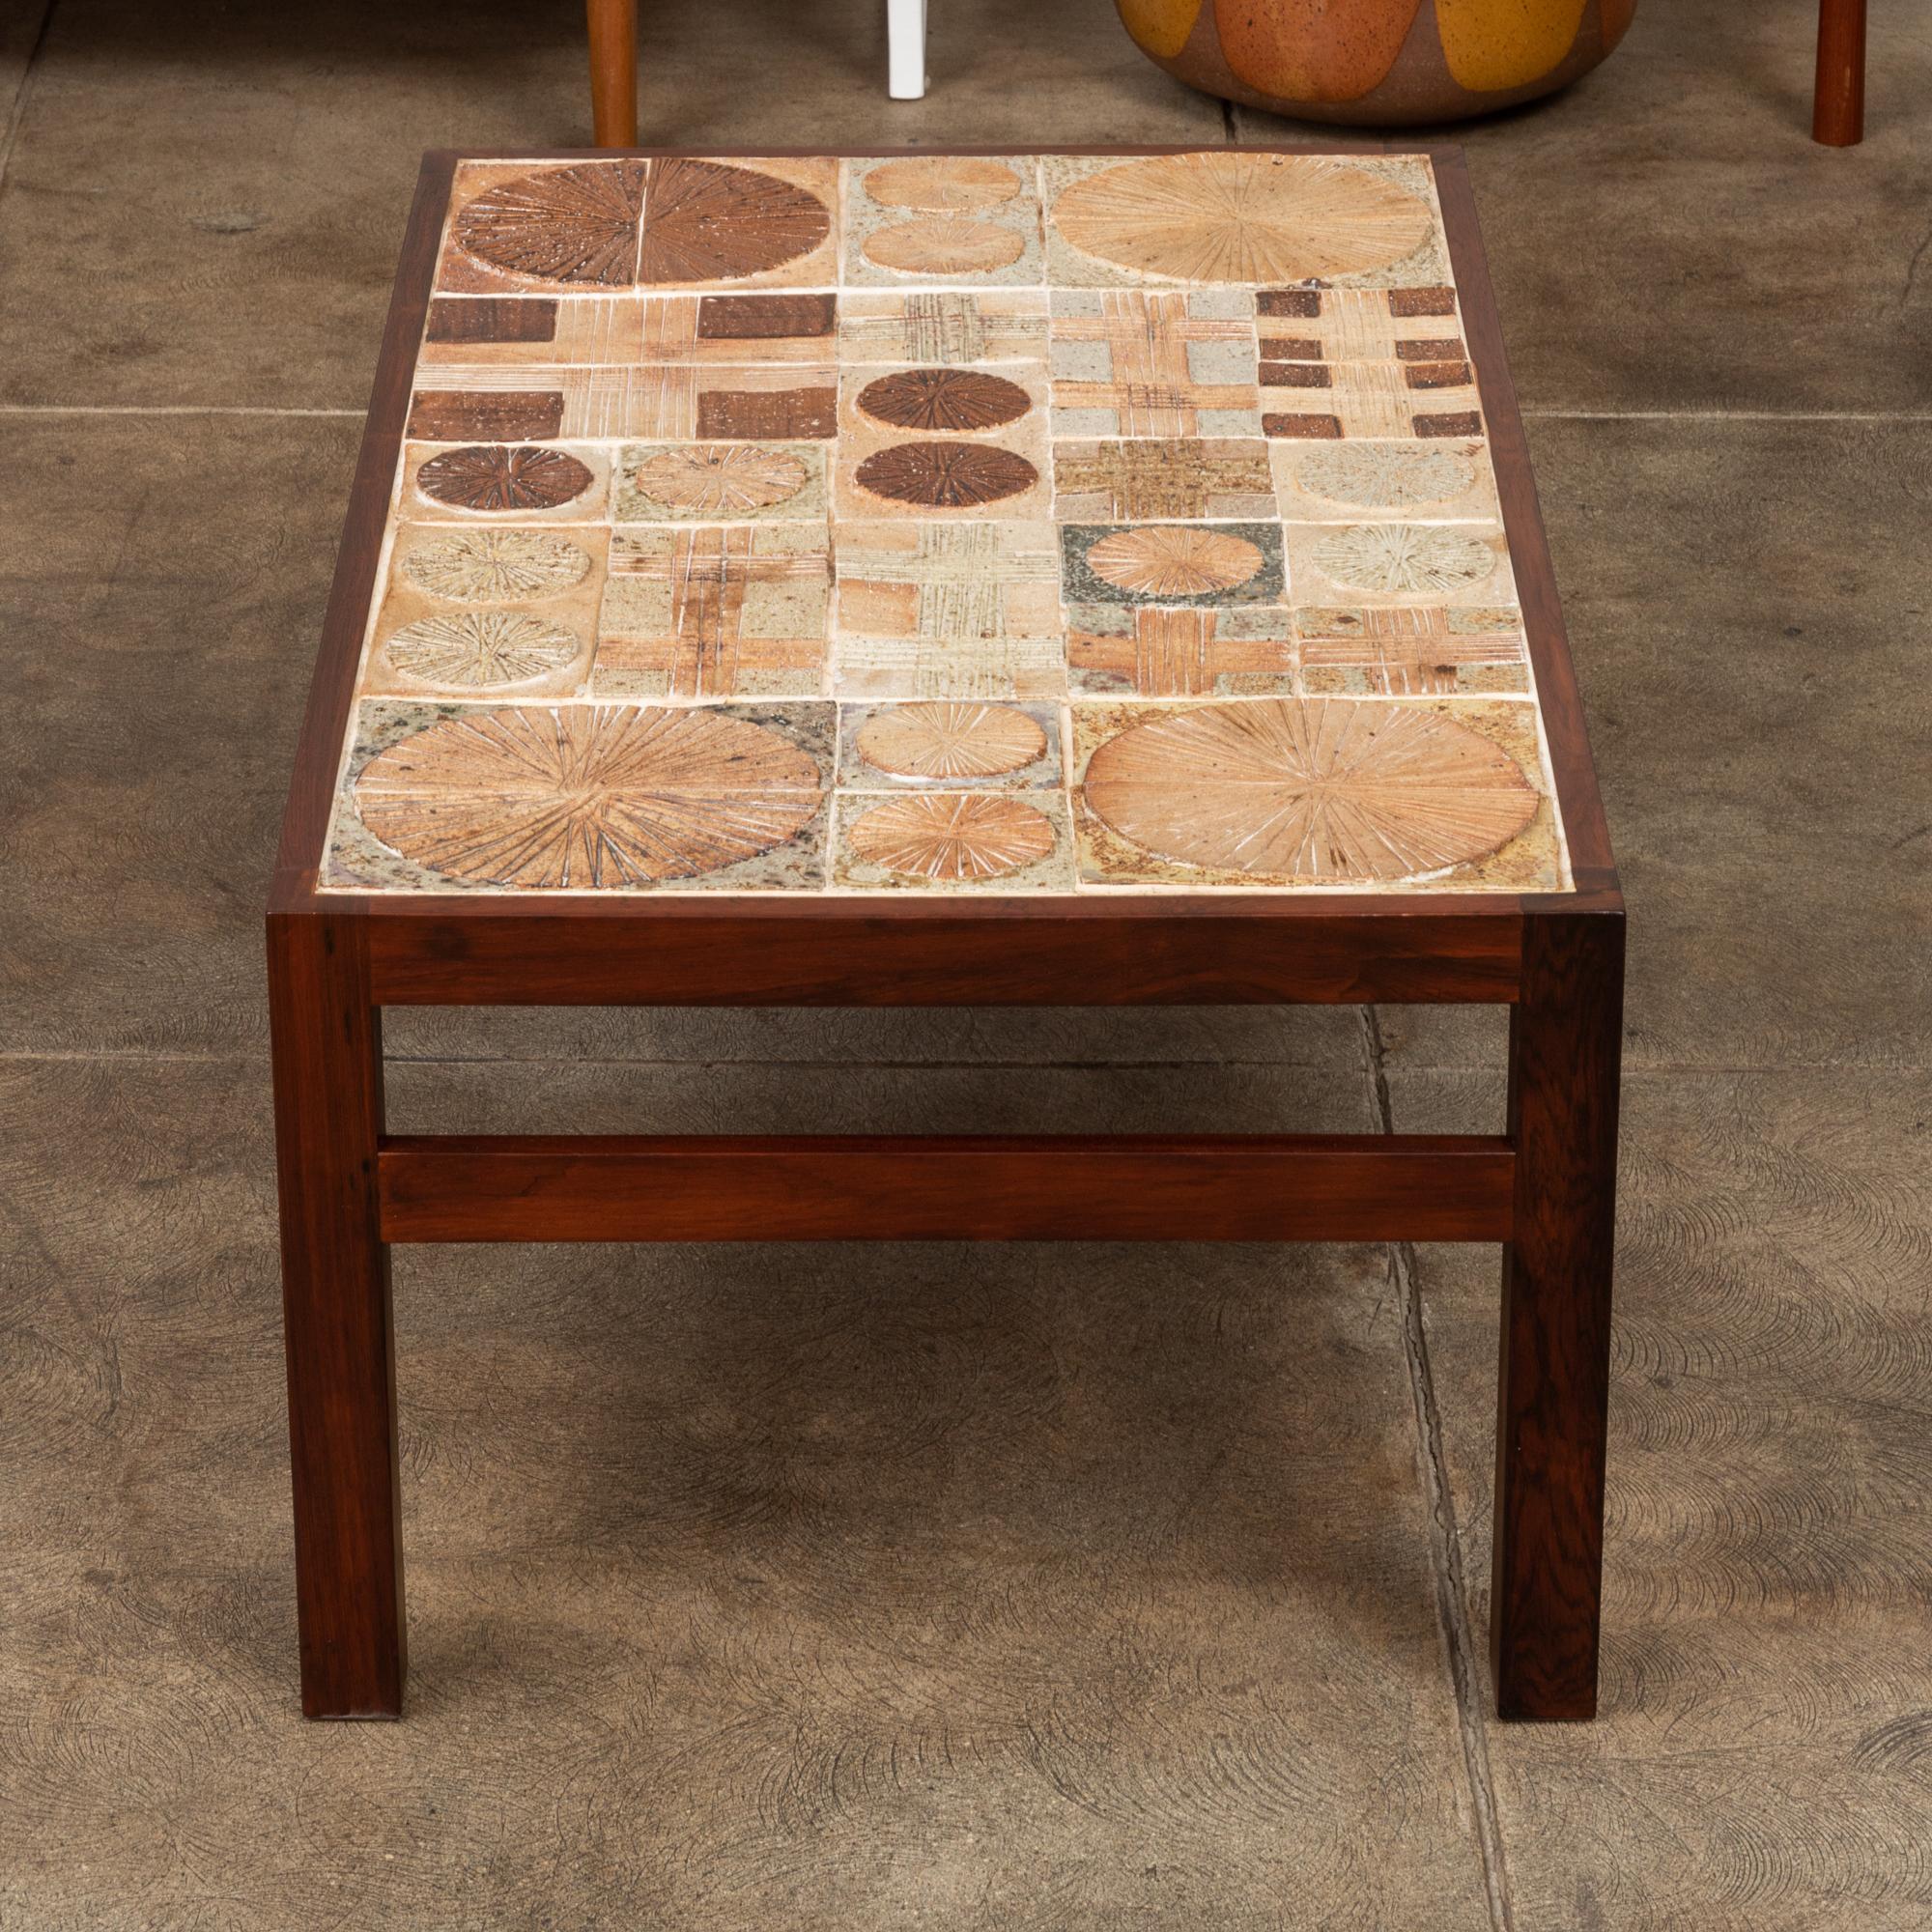 Rosewood and Mosaic Tile Coffee Table by Tue Poulsen 1